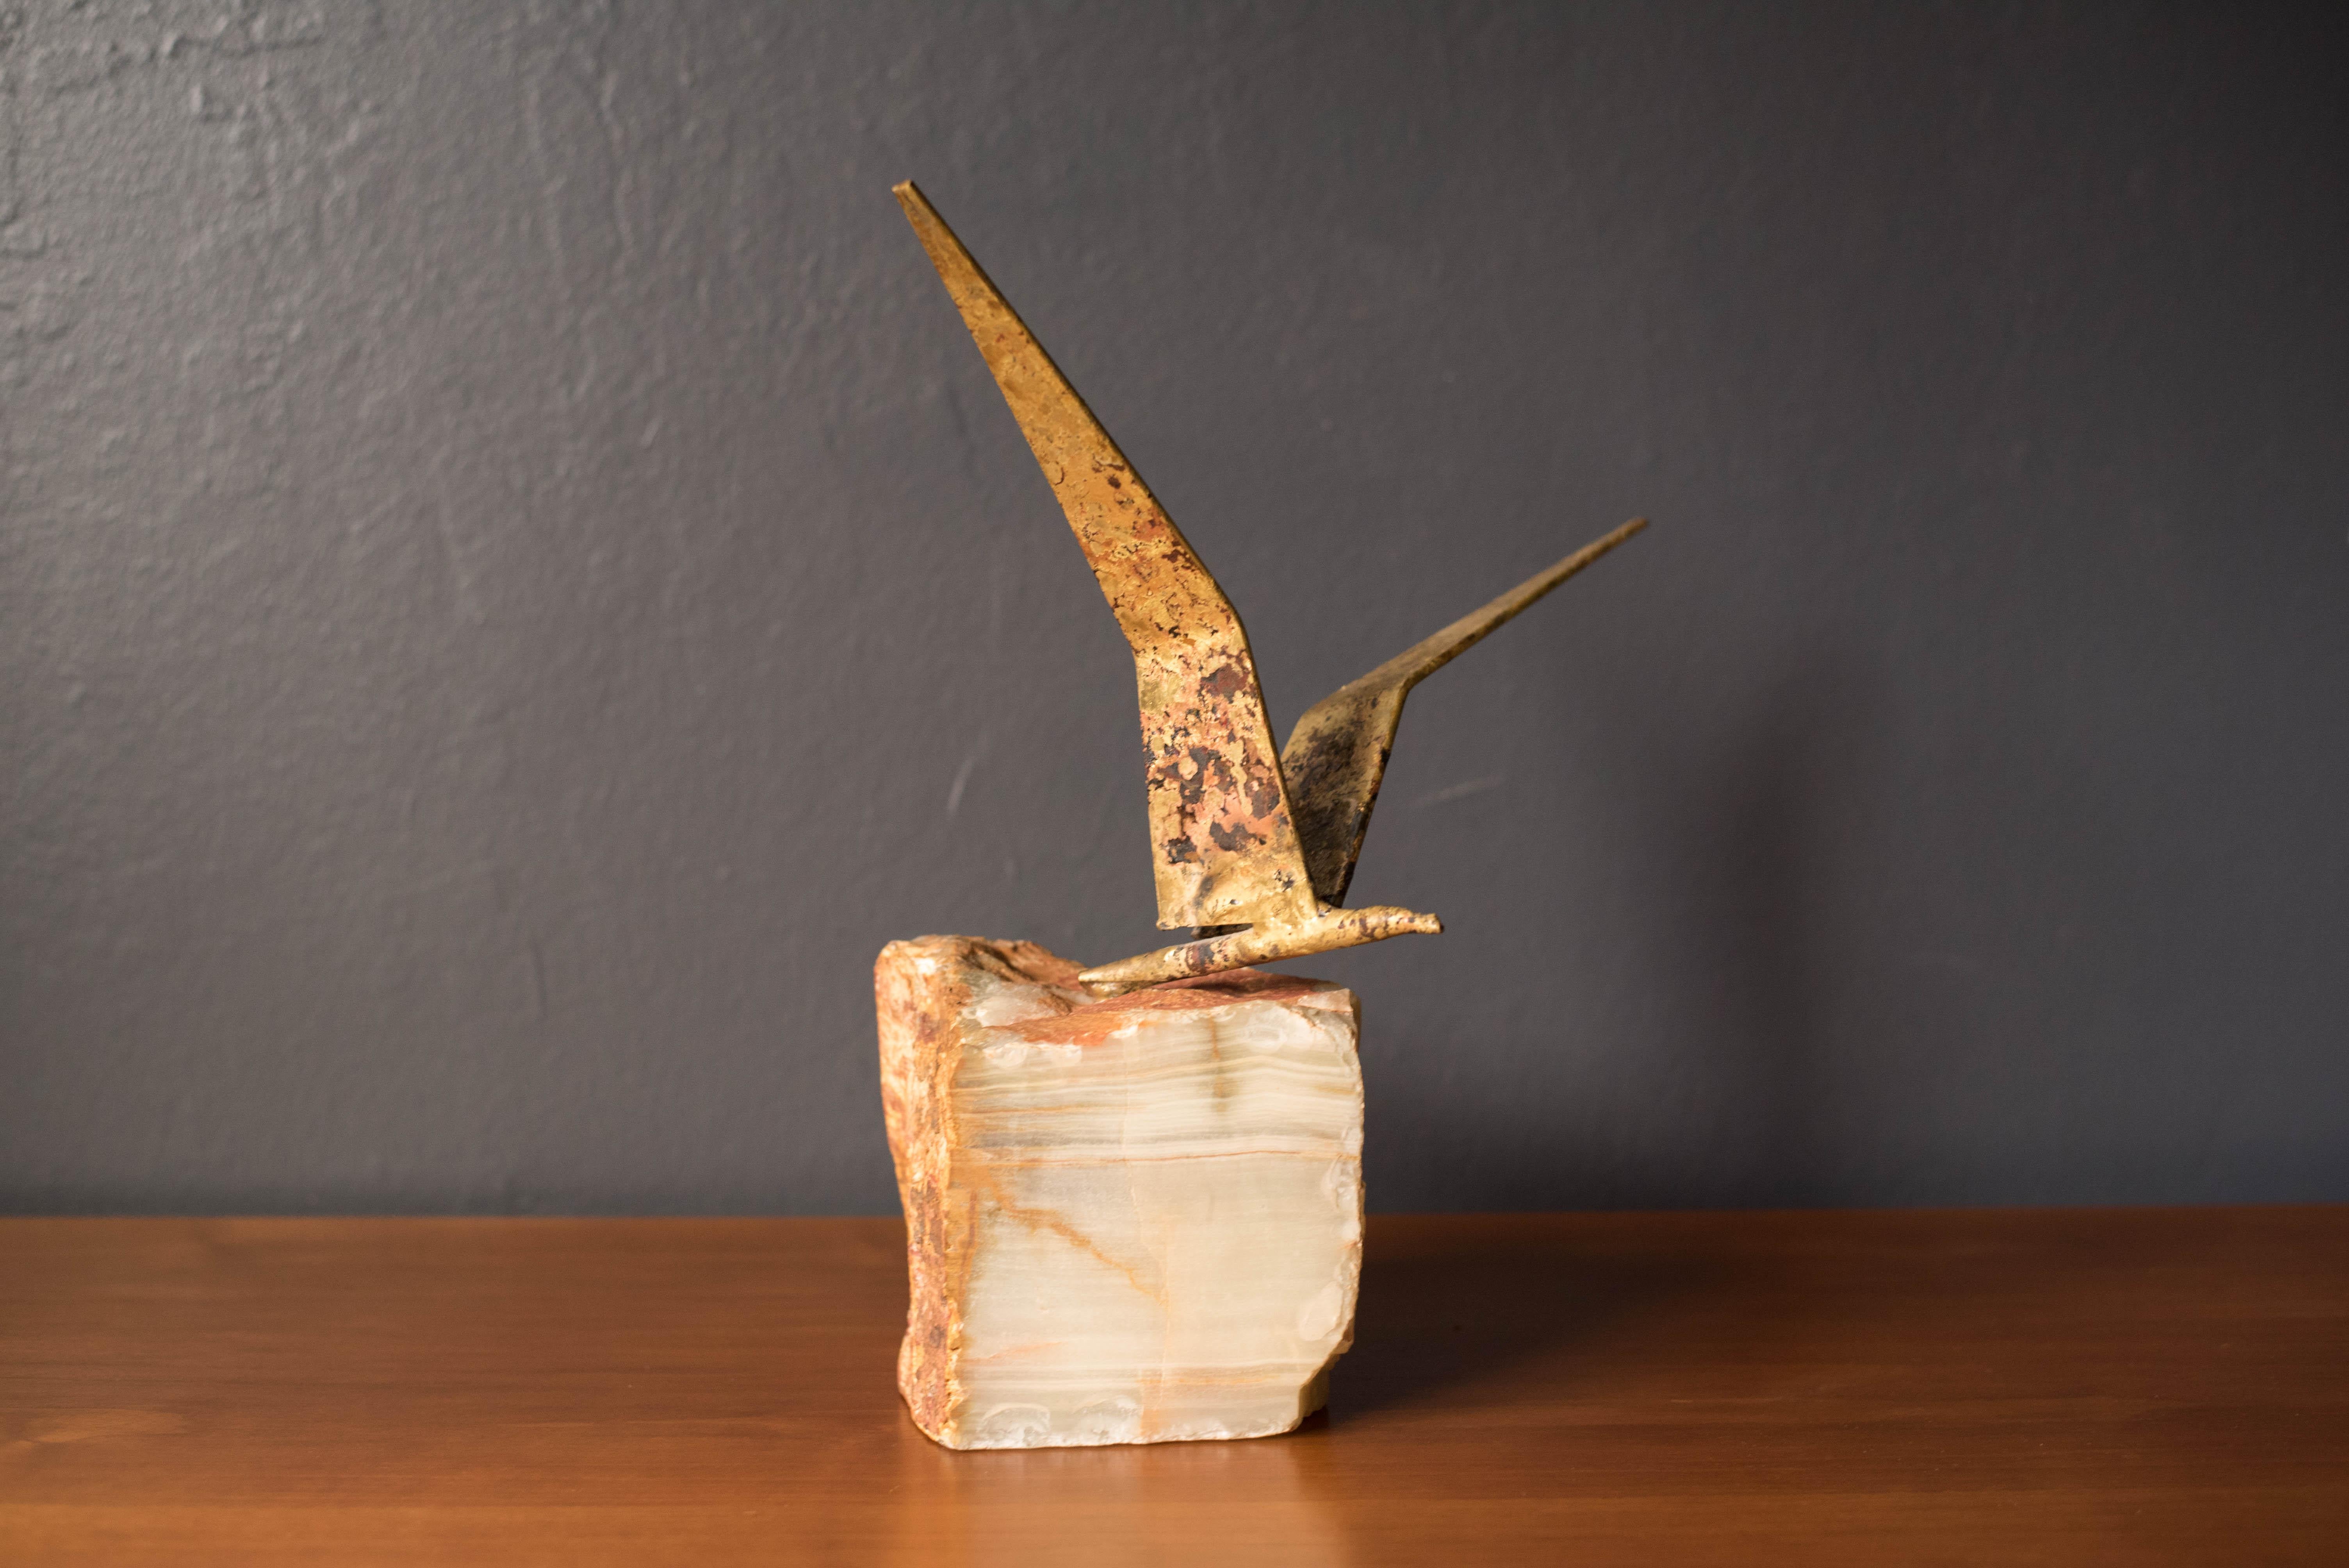 Midcentury abstract bird in flight sculpture signed C. Jere '69 for Artisan House. This piece is made of mixed metals with beautifully aged patina and is mounted on a heavy striated stone base.